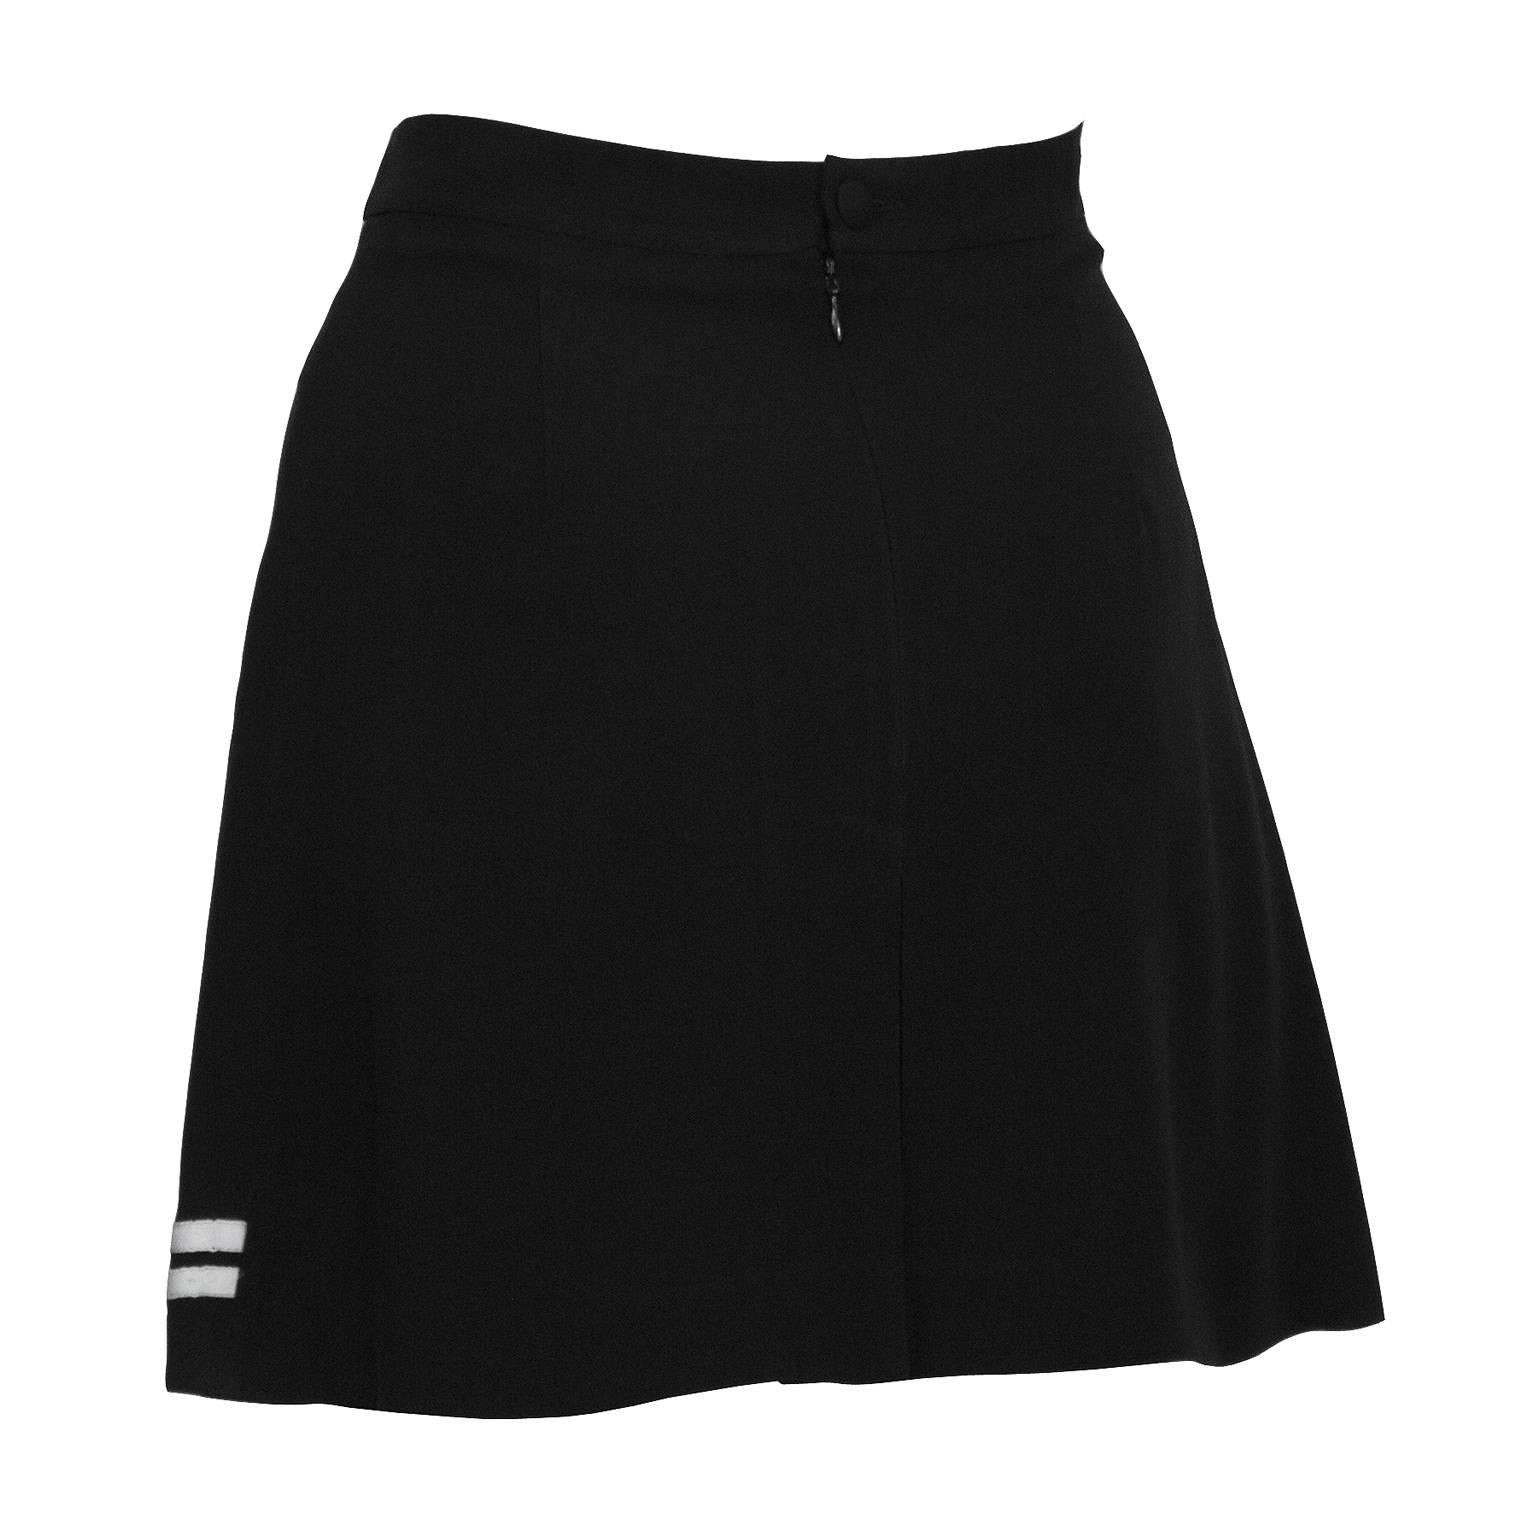 1990's Dolce & Gabbana Black and White Mini Skort In Excellent Condition For Sale In Toronto, Ontario